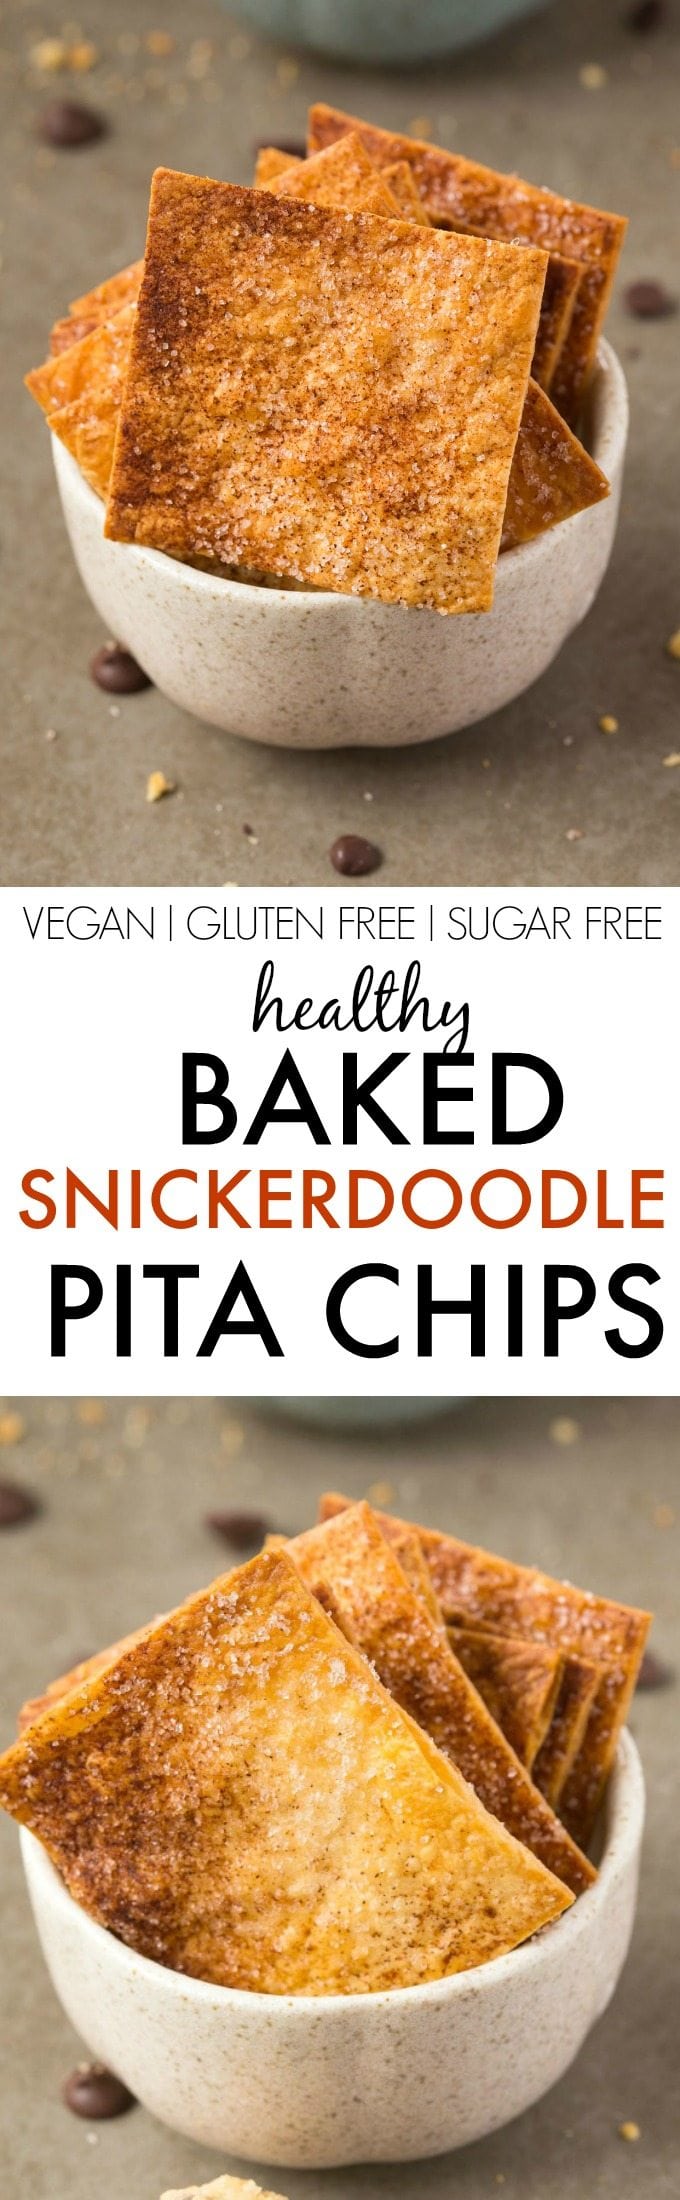 Healthy BAKED Snickerdoodle Pita Chips- Crispy, sweet, salty and with a delicious punch of cinnamon, it's healthy twist on the classic cookie- Quick, easy, DELICIOUS! {vegan, gluten free, sugar free recipe}- thebigmansworld.com